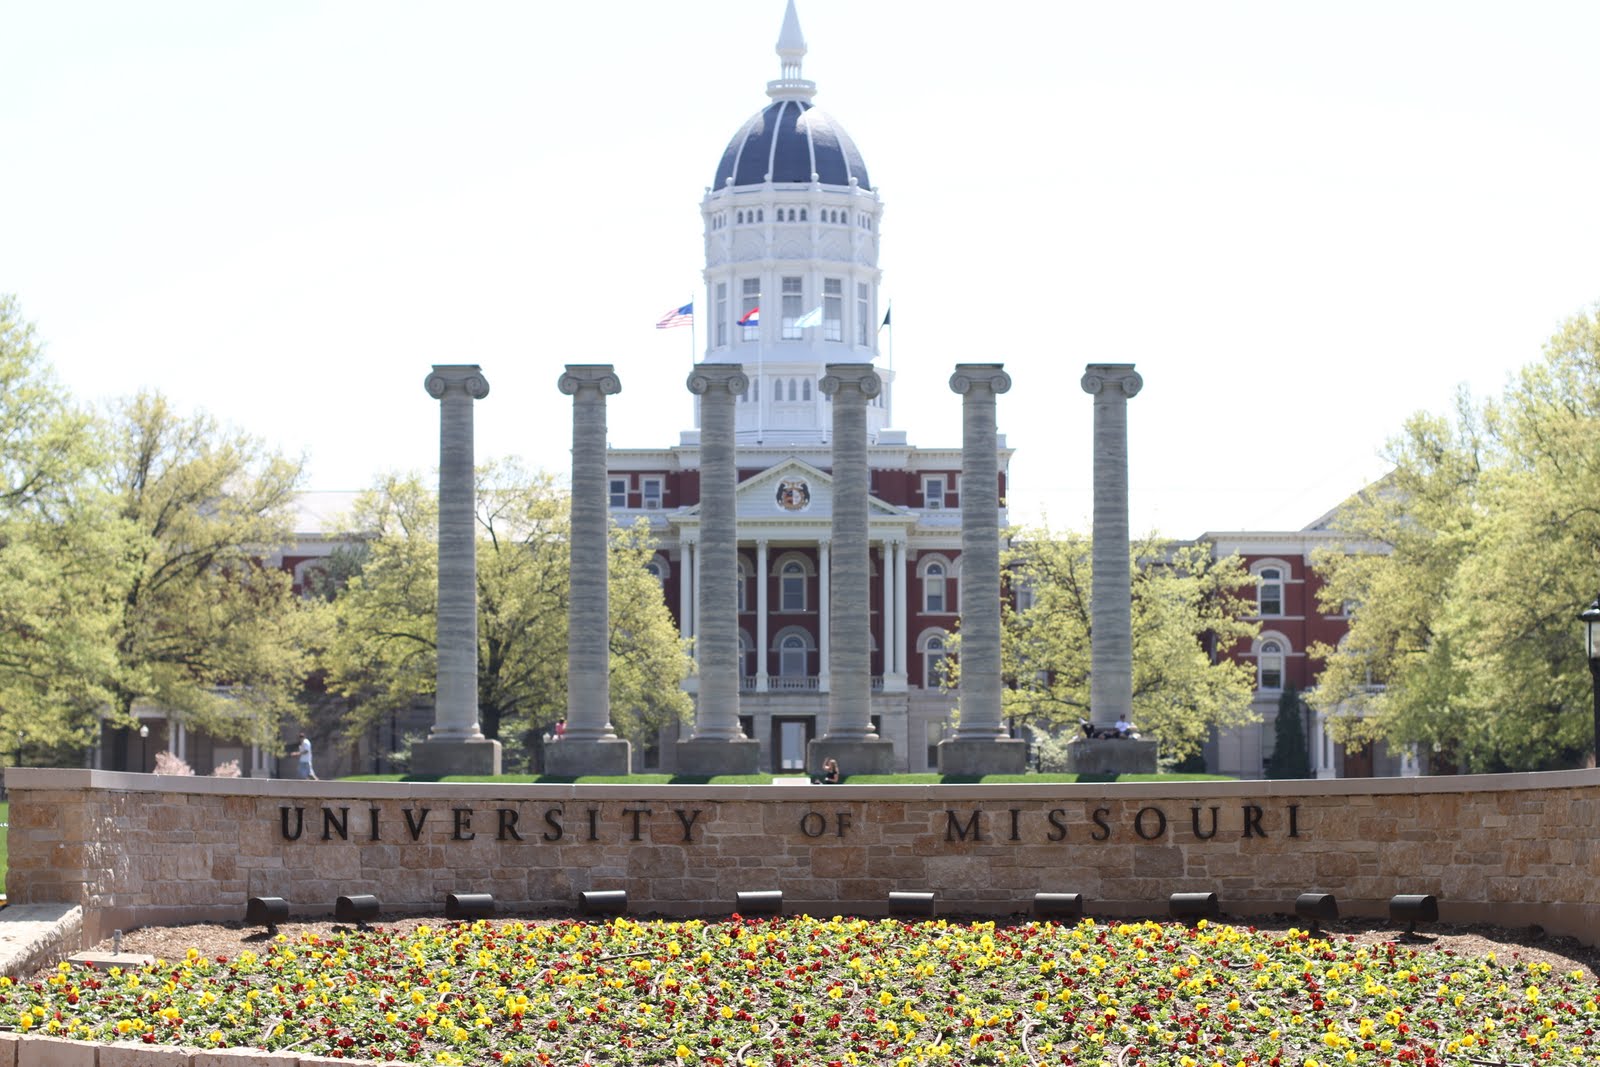 Was the Fecal Swastika at Mizzou a Hoax?